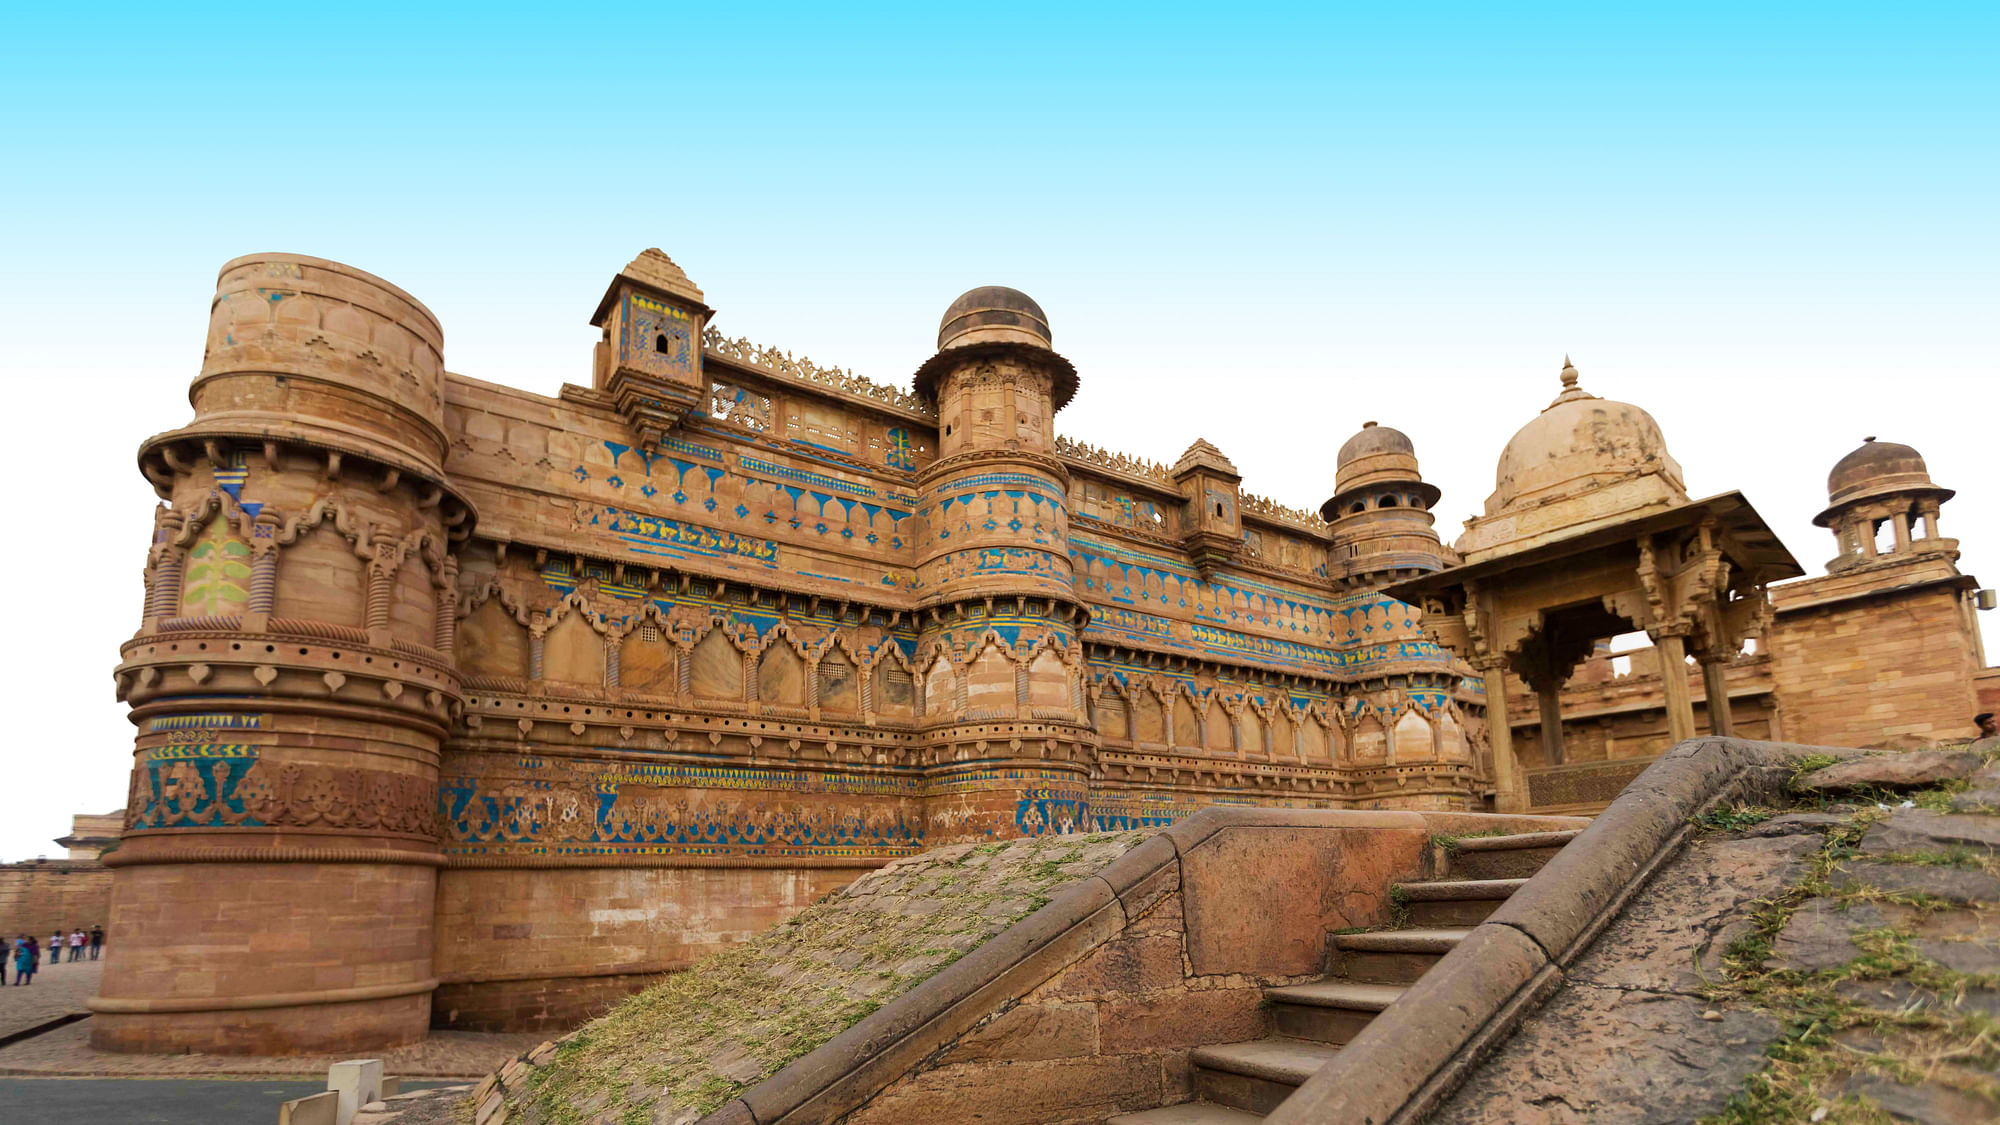 Gwalior Fort was once described by Babur as ‘The Pearl Among the Fortresses of India’